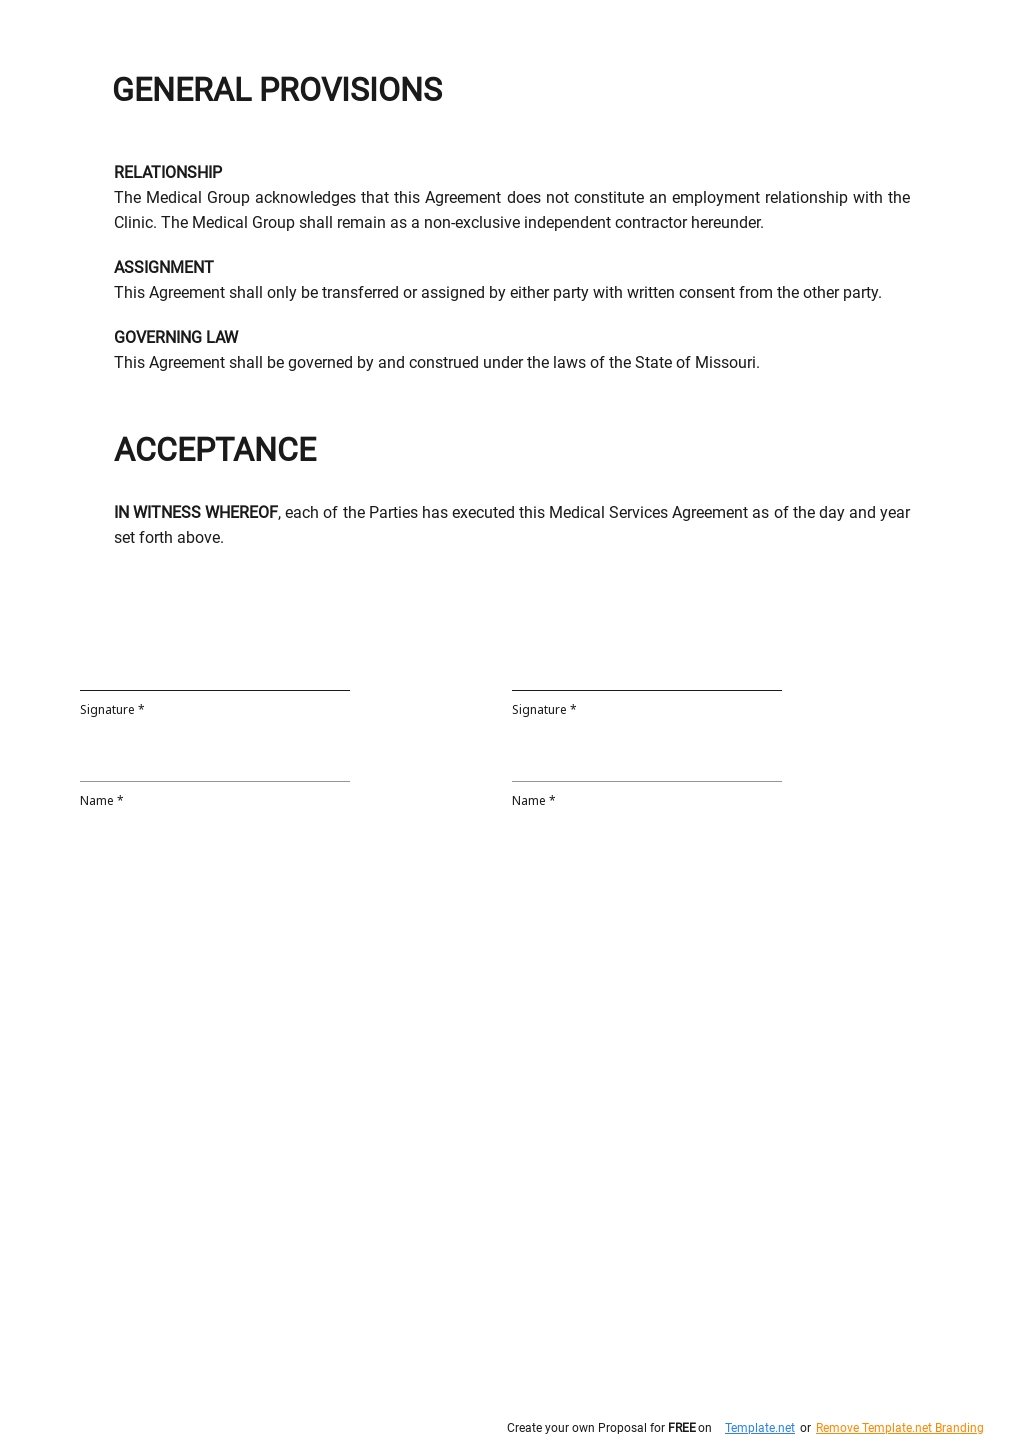 Medical Services Agreement Template 2.jpe